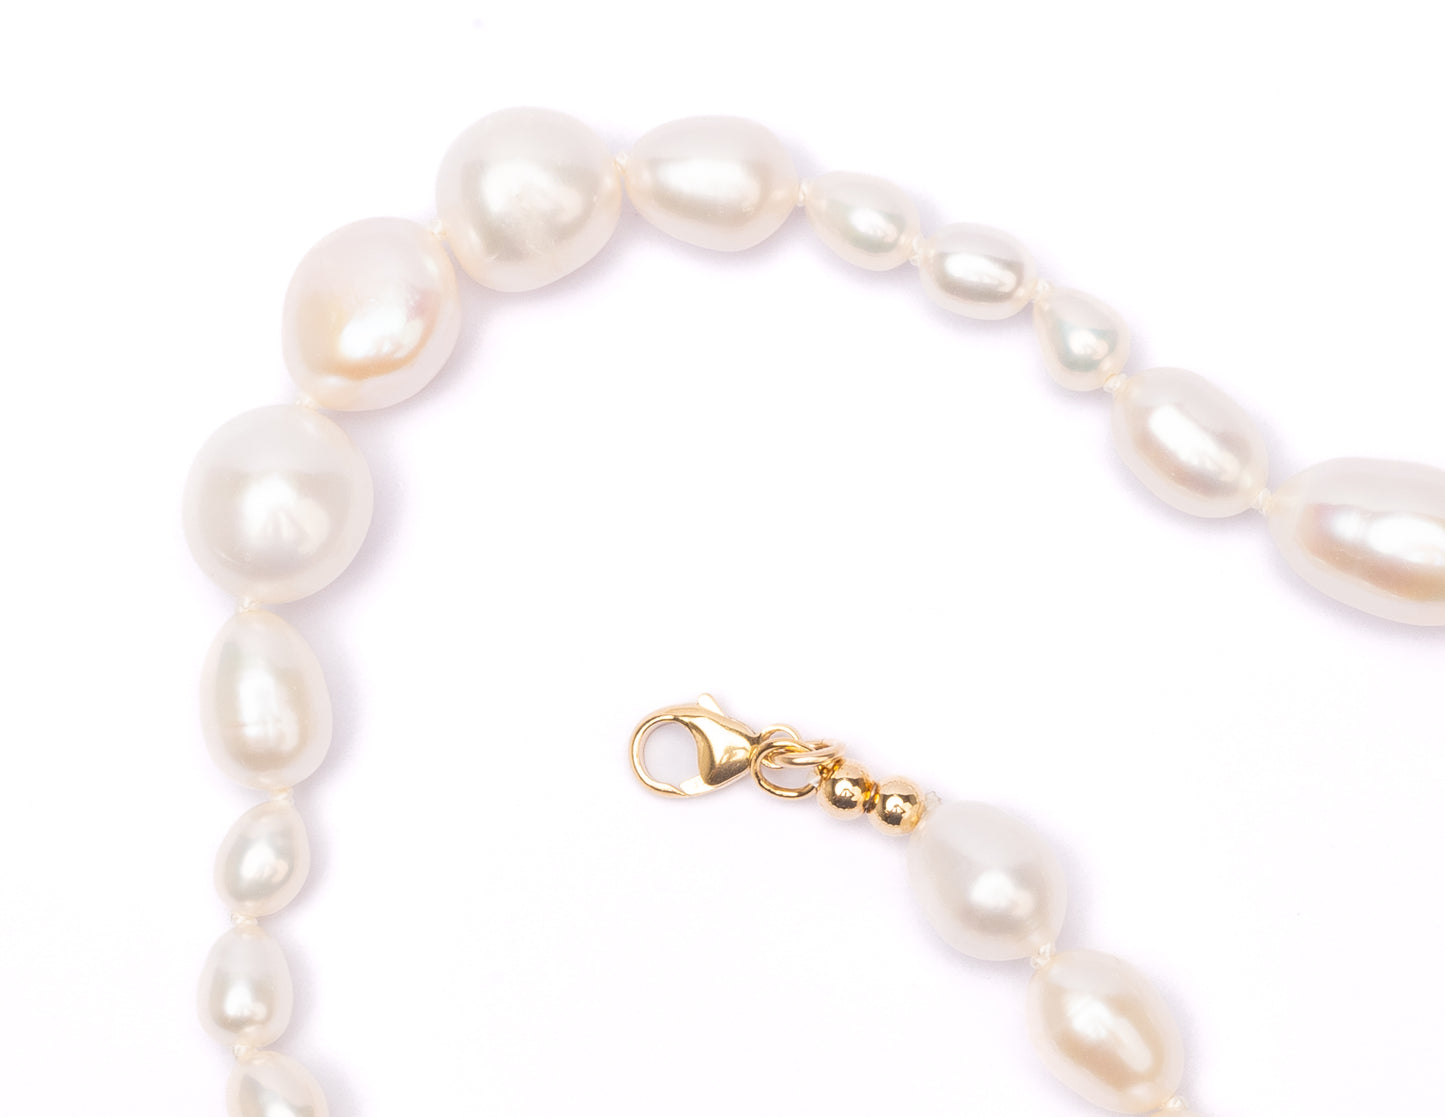 Mixed Teardrop Freshwater Pearl Necklace